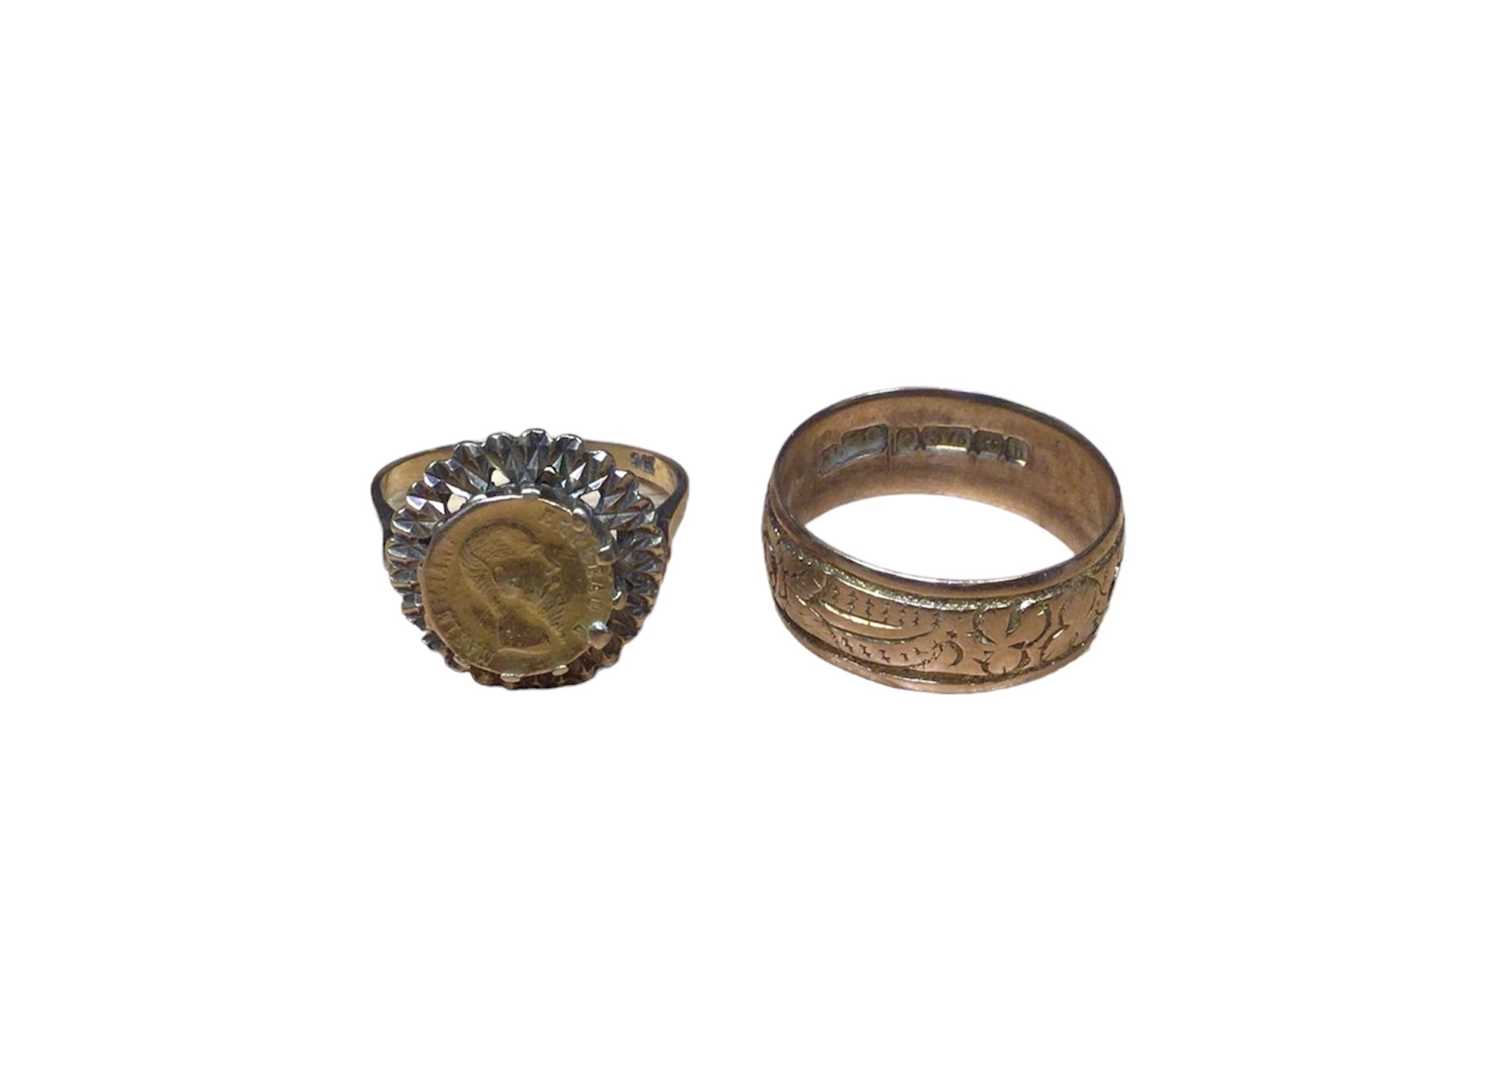 9ct gold mounted Mexican coin ring and 9ct gold wedding ring with foliate decoration